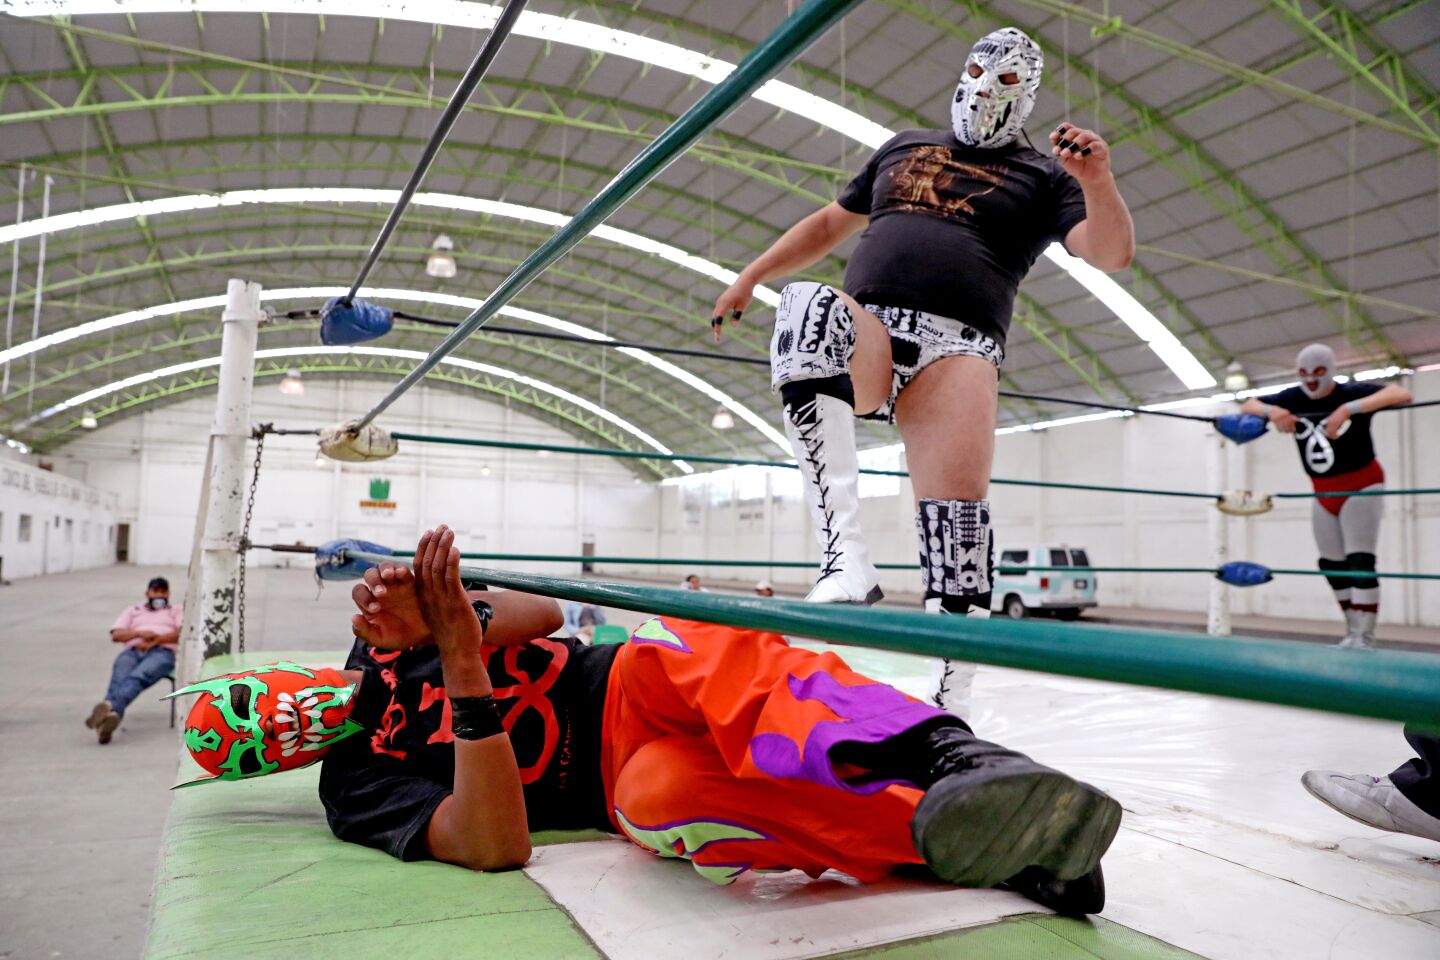 Wrestler Black Lesbon gets kicked by Tazosomok during a lucha libre event that was broadcast online.